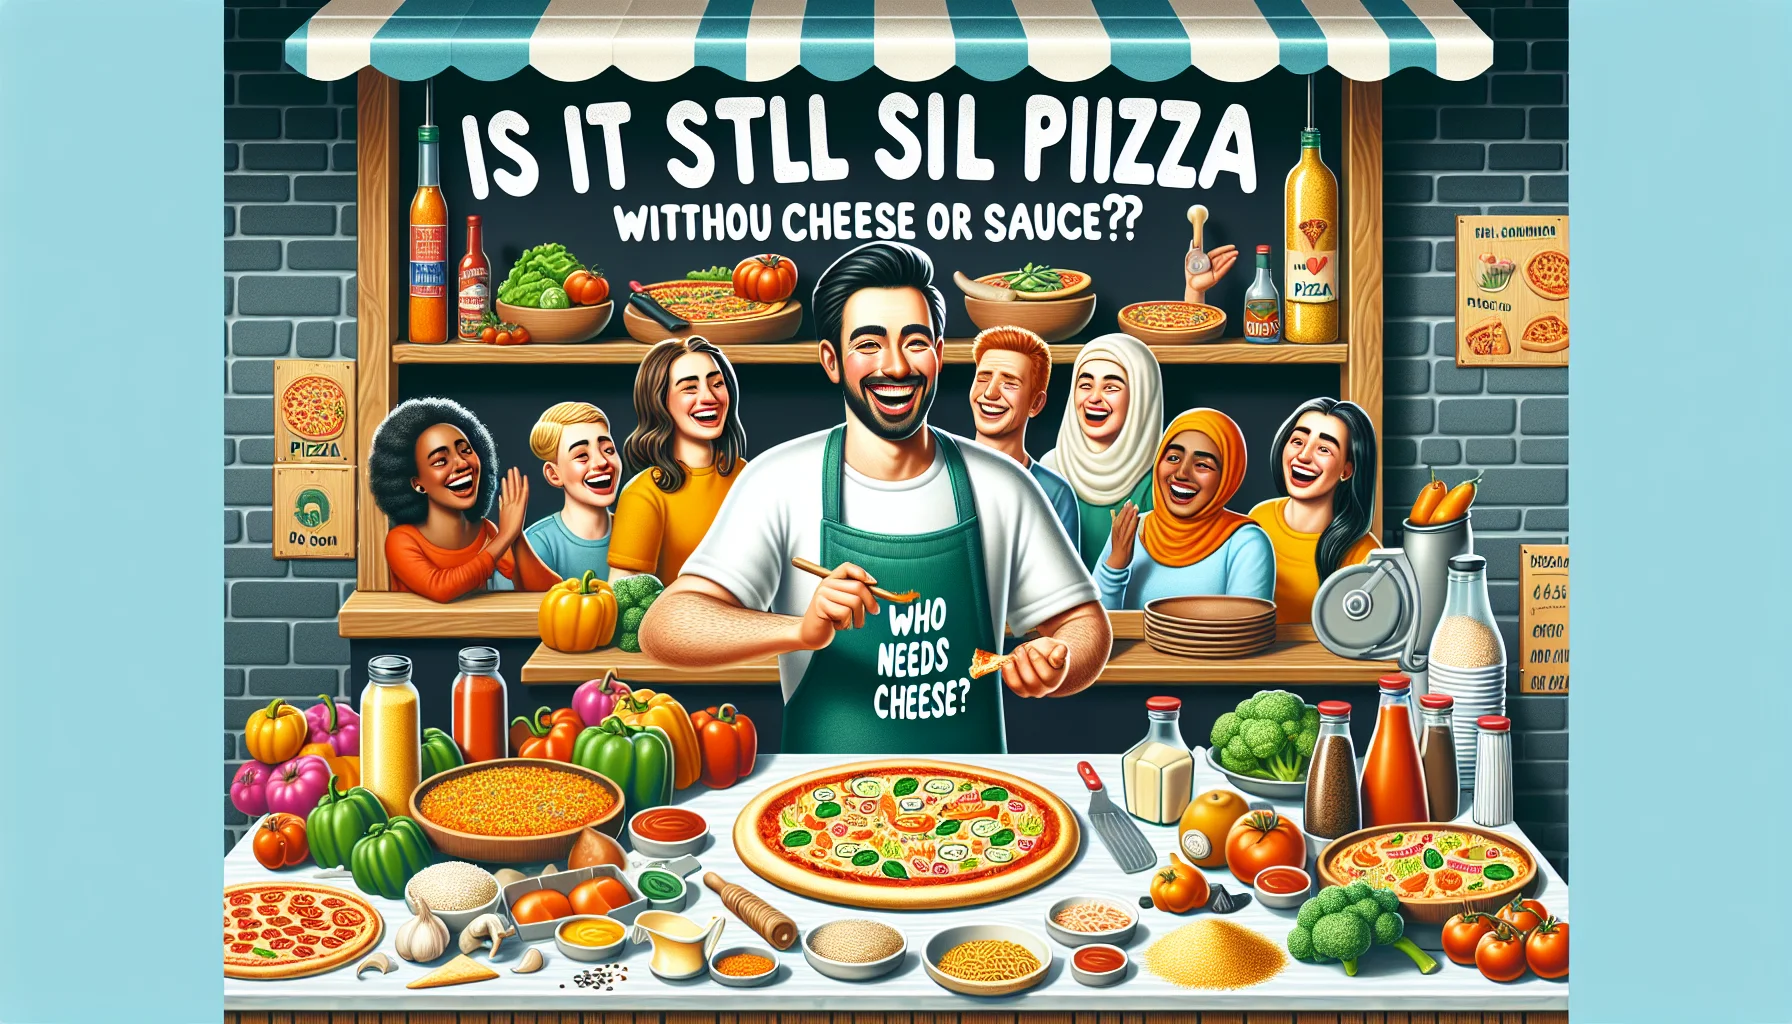 A humorous scene in a pizzeria with a sign reading 'Is It Still Pizza Without Cheese or Sauce?'. The pizzeria is beautifully decked out with vibrant colors and inviting aesthetics. Varied options of healthy and cost-effective pizza ingredients like fresh vegetables, grains and lean proteins are attractively displayed. A smiling pizzaiolo, of Caucasian descent, is creatively arranging these healthy ingredients on a pizza dough. Their apron humorously states 'Who Needs Cheese?'. Additional small groups of customers of varying gender and descent, like South Asian, Hispanic, and Middle-Eastern, can be seen laughing and enjoying the unique pizzas.